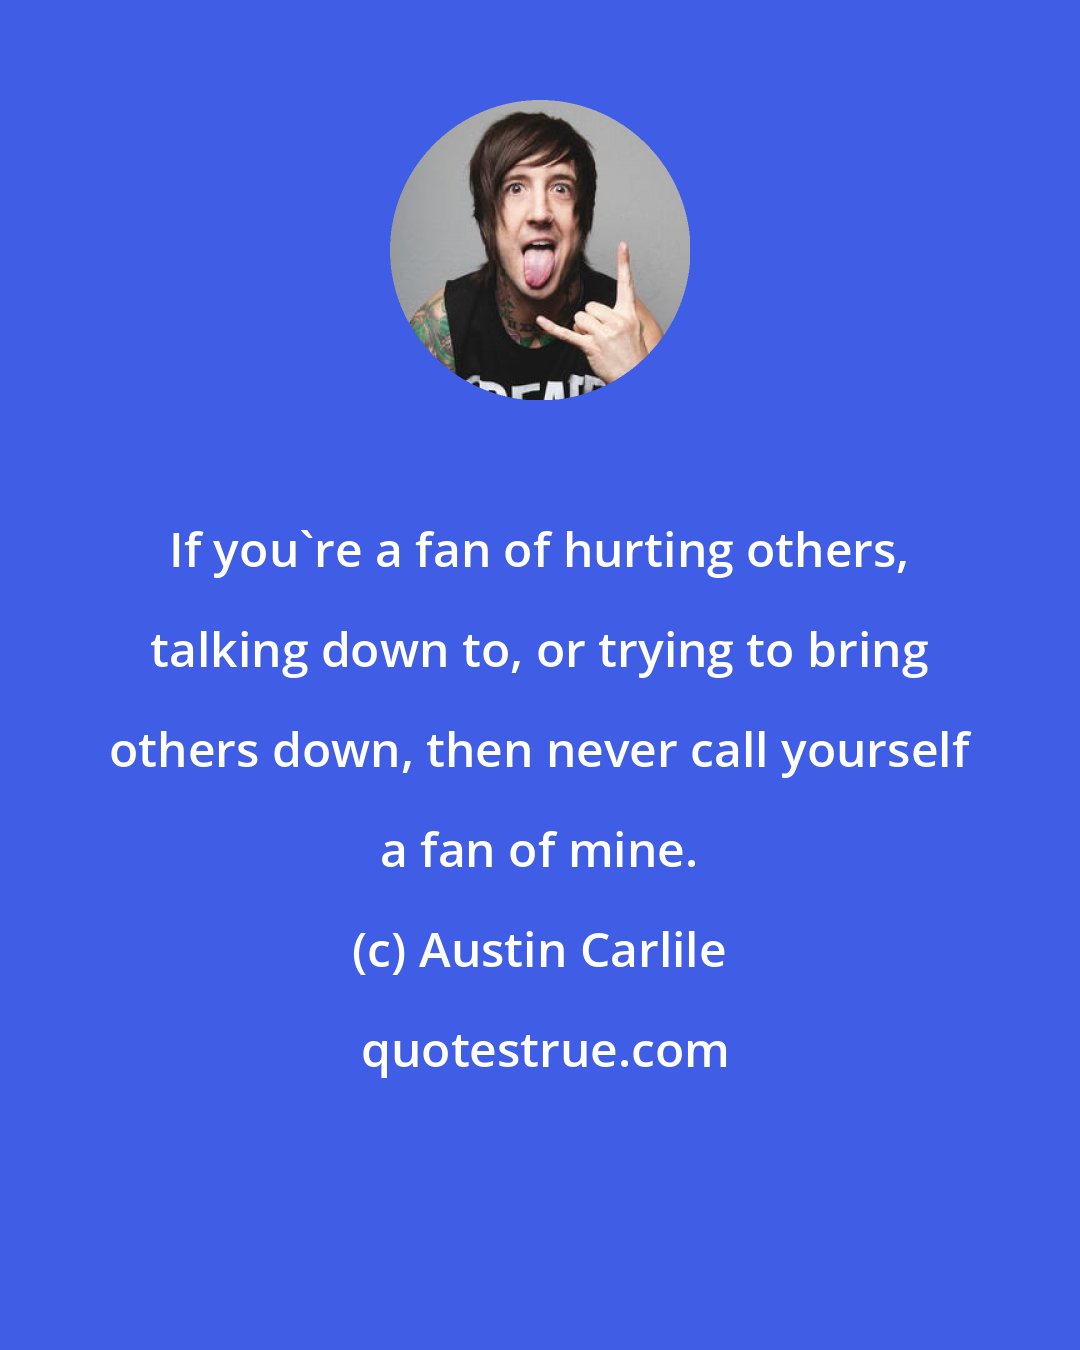 Austin Carlile: If you're a fan of hurting others, talking down to, or trying to bring others down, then never call yourself a fan of mine.